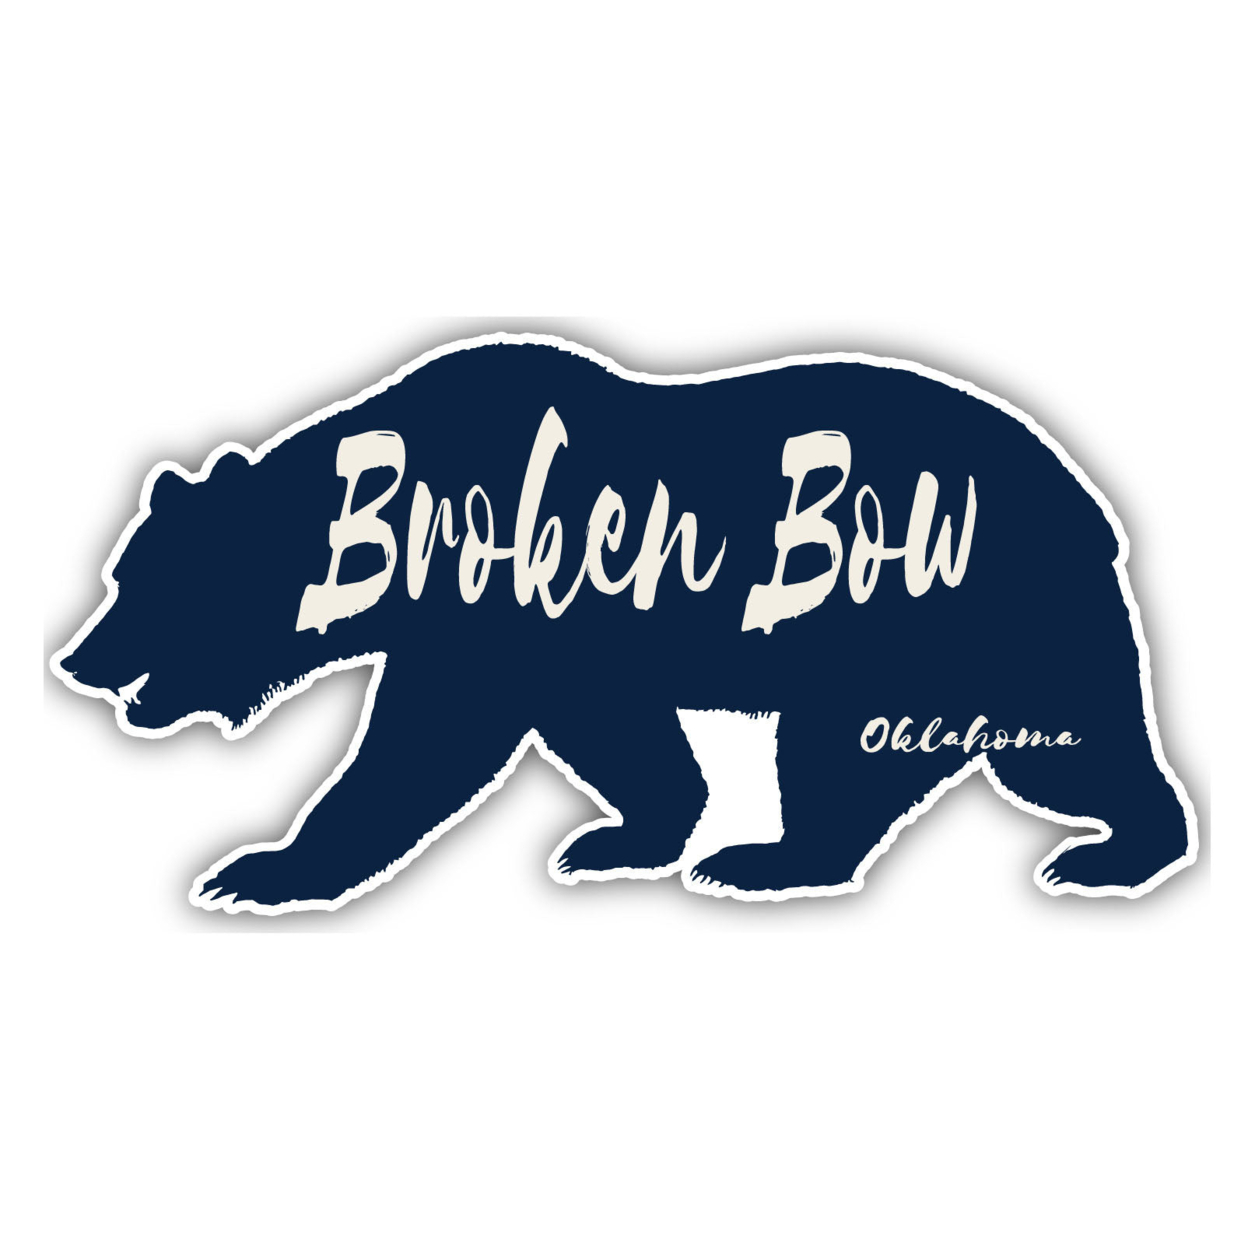 Broken Bow Oklahoma Souvenir Decorative Stickers (Choose Theme And Size) - 4-Pack, 8-Inch, Bear